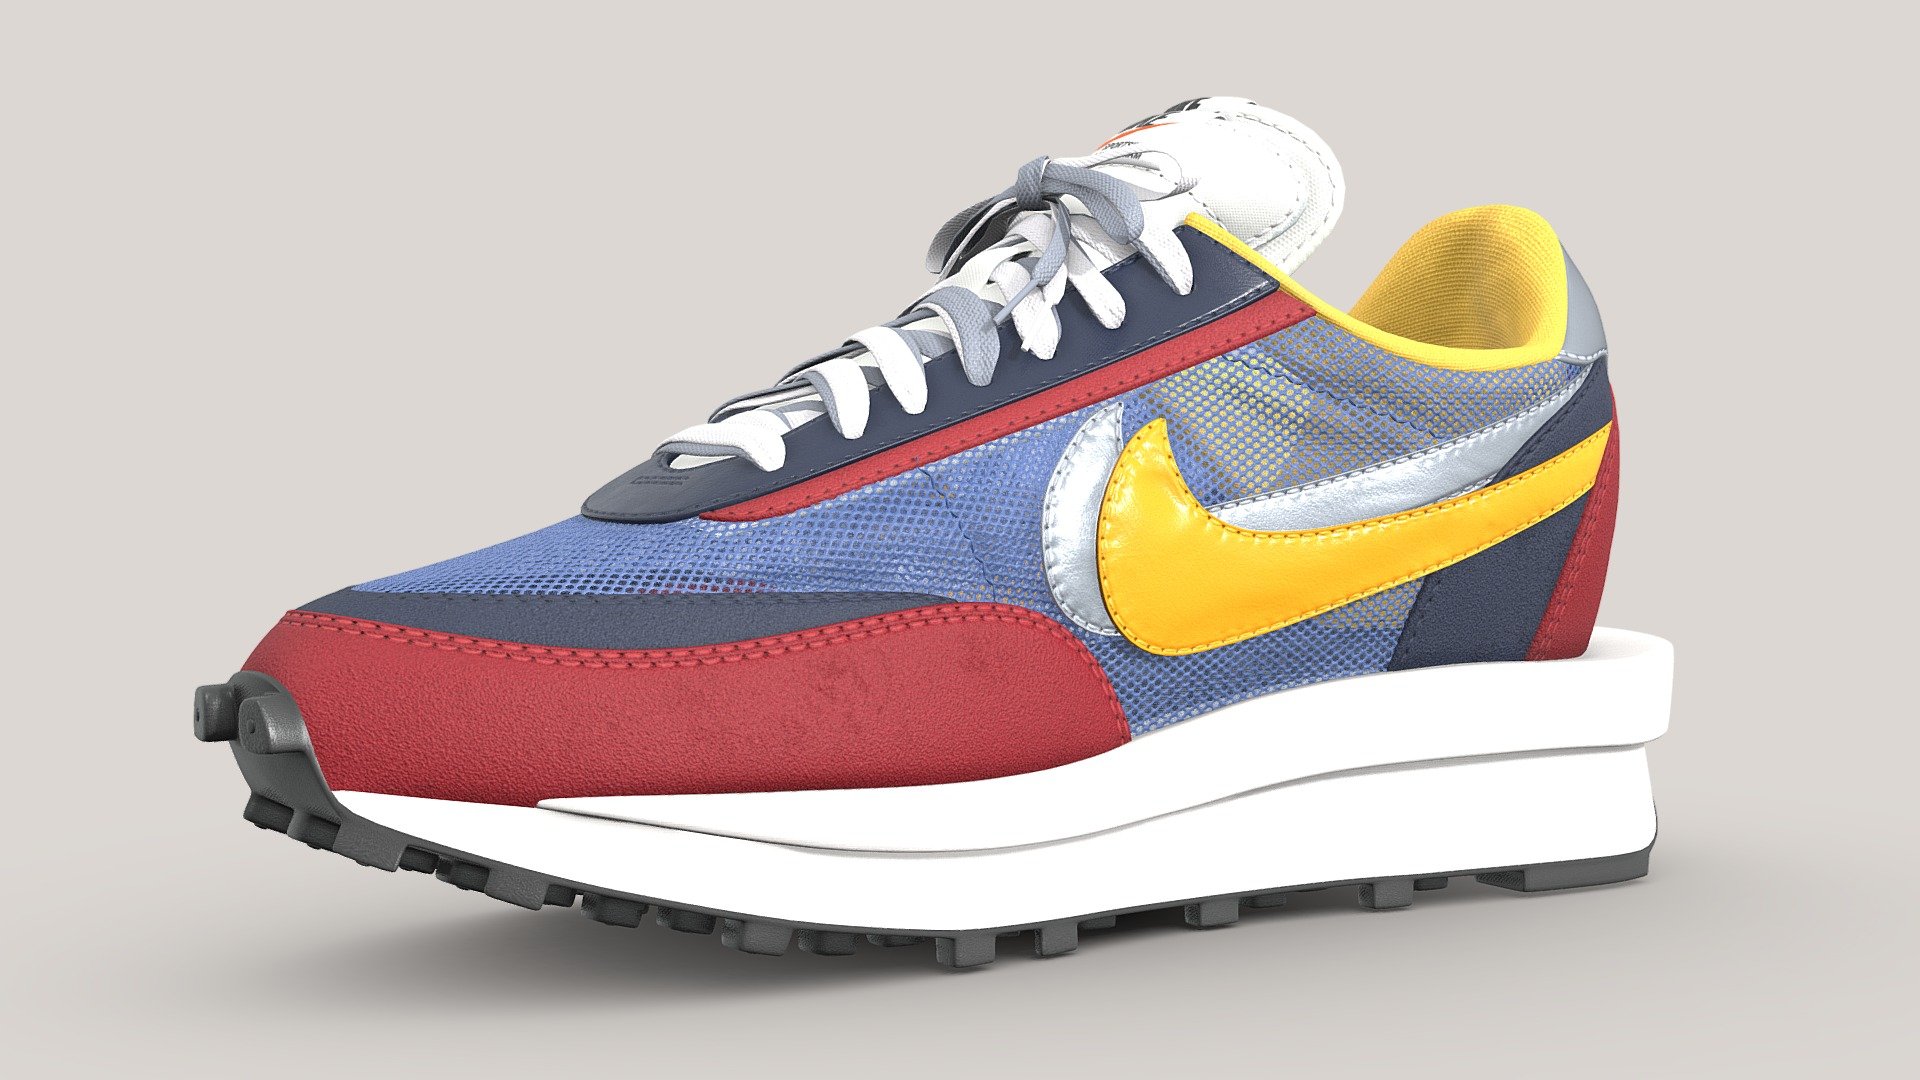 Nike Sacai LD Waffle in the Varsity Blue Colourway. This is one of the original colourways that released in 2019.

This model is a 1:1 replication of the original. All dimensions, angles, and curves are the same as the real life counterpart. The shoe is subdivision ready with a base polycount of 23,399 polys per shoe. The mesh uses four texture sets, all at 4096x4096 resolution, with the following maps in use: Base Color, Metallic, Roughness, Normal. The base color map contains the transparency information, so plug the alpha of the texture into the alpha channel, or alternatively put the base color texture where the opacity should go

Included is a One Mesh version which uses just 1 texture map per shoe,

The main Blender files contain the full texture setup. The mesh is subdivision ready so you can increase/reduce the subdivision count to achieve your desired look 3d model